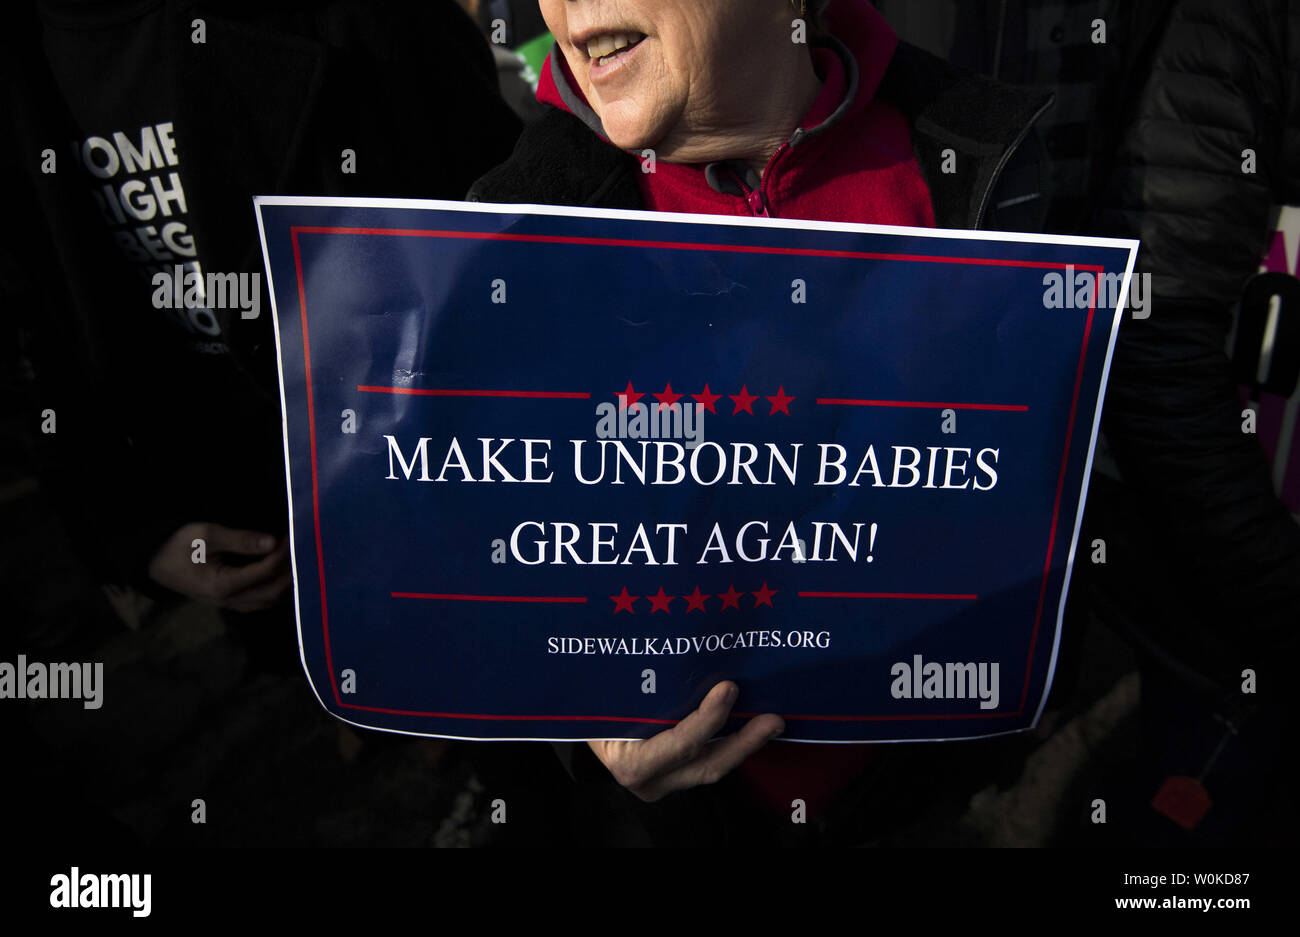 An Anti-abortion activist carries a Trump campaign style sign at the Supreme Court during the March for Life anti-abortion rally, in Washington, D.C. on January 18, 2019. The march took place on the 46th anniversary of the Supreme Court's Roe v. Wade decision federally legalizing abortion. Photo by Kevin Dietsch/UPI Stock Photo